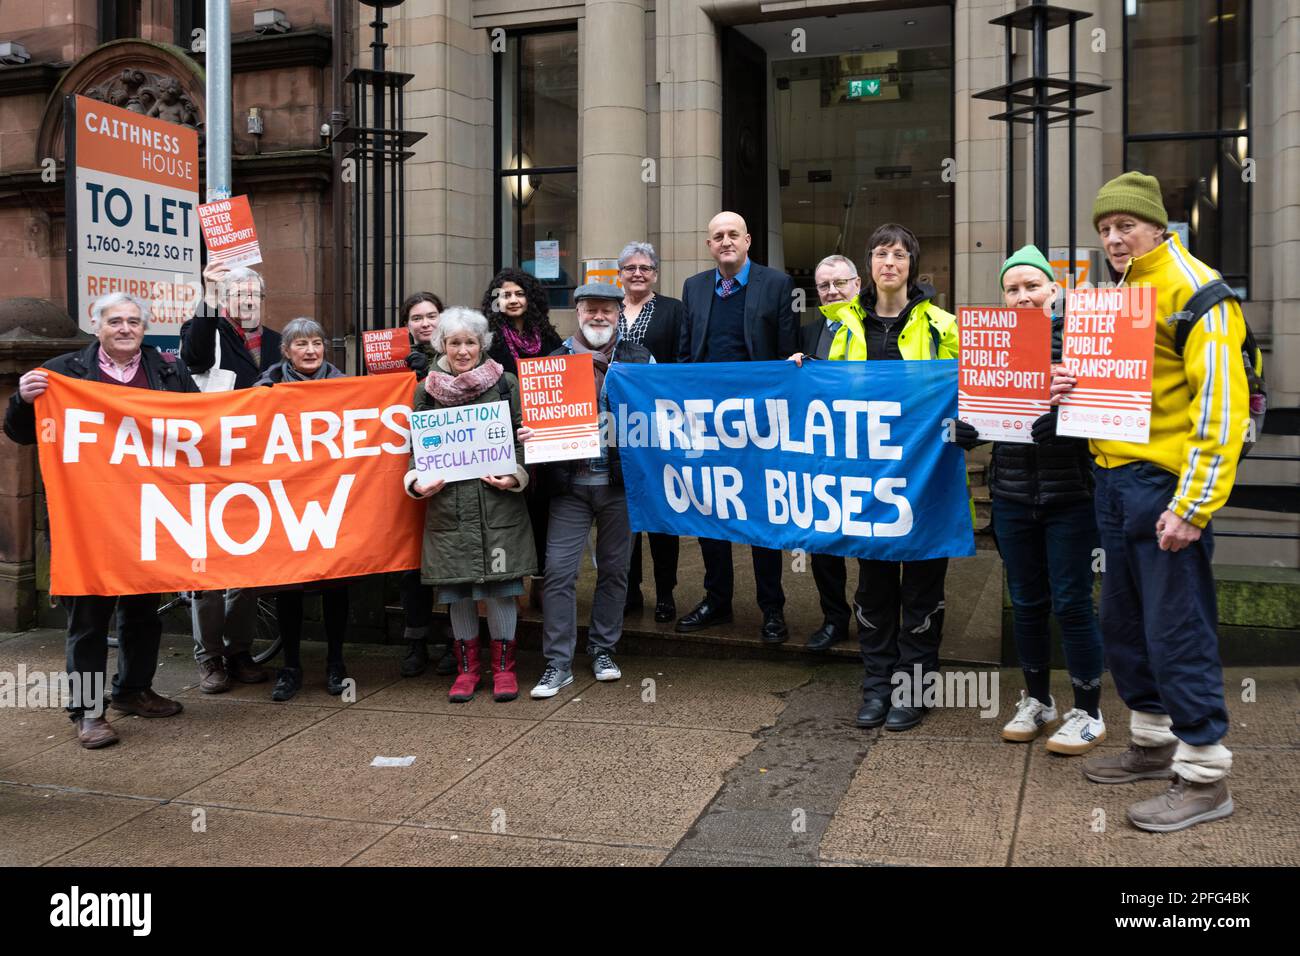 Glasgow, Scotland, UK - 17 March 2022: Get Glasgow Moving 'Fair Fares Now' Passenger Rally protesters meet councillors outside Strathclyde Partnership for Transport (SPT) offices. Glasgow fares are higher than many other cities and Get Glasgow Moving is calling for the SPT to seize the new powers in the Transport Act 2019 to regulate the private bus companies, cap fares and deliver a fully-integrated public transport system across Glasgow. Pictured: protestors alongside Councillors Alan Moir (Scottish Labour and Vice chair of SPT), Maureen Devlin (Scottish Labour), Roza Salih (SNP)  Michael M Stock Photo